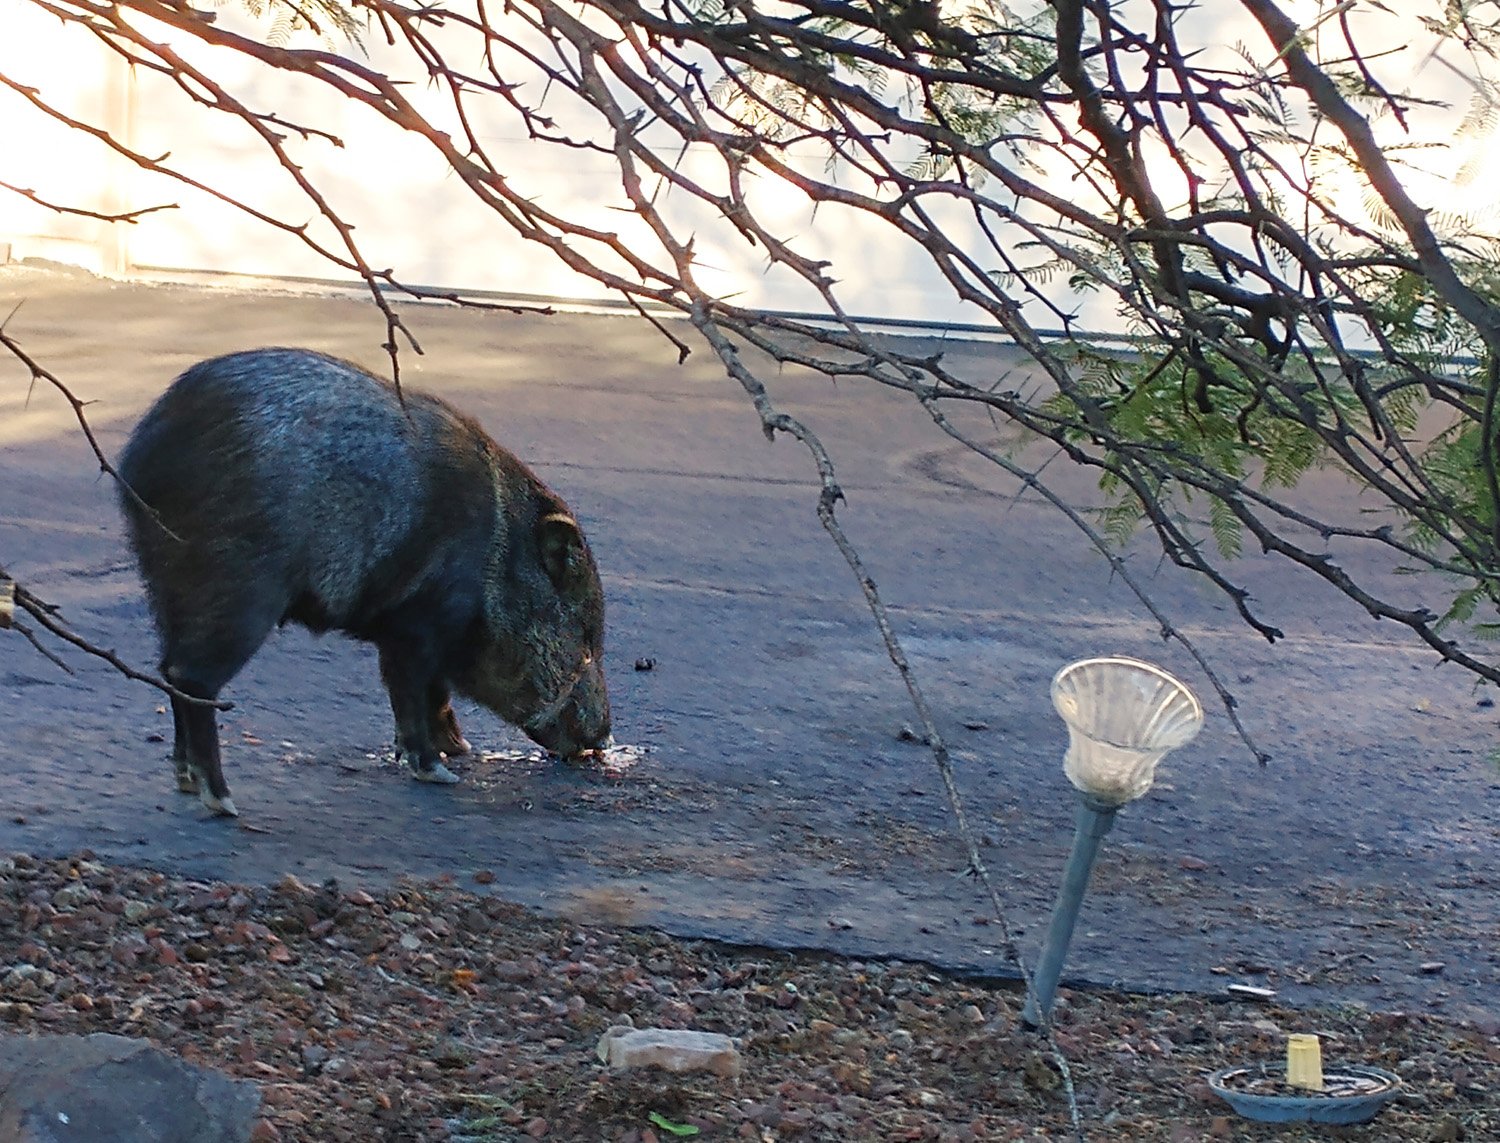 This place is infested with these little wild pigs called Javelinas. Here's one eating some garbage.